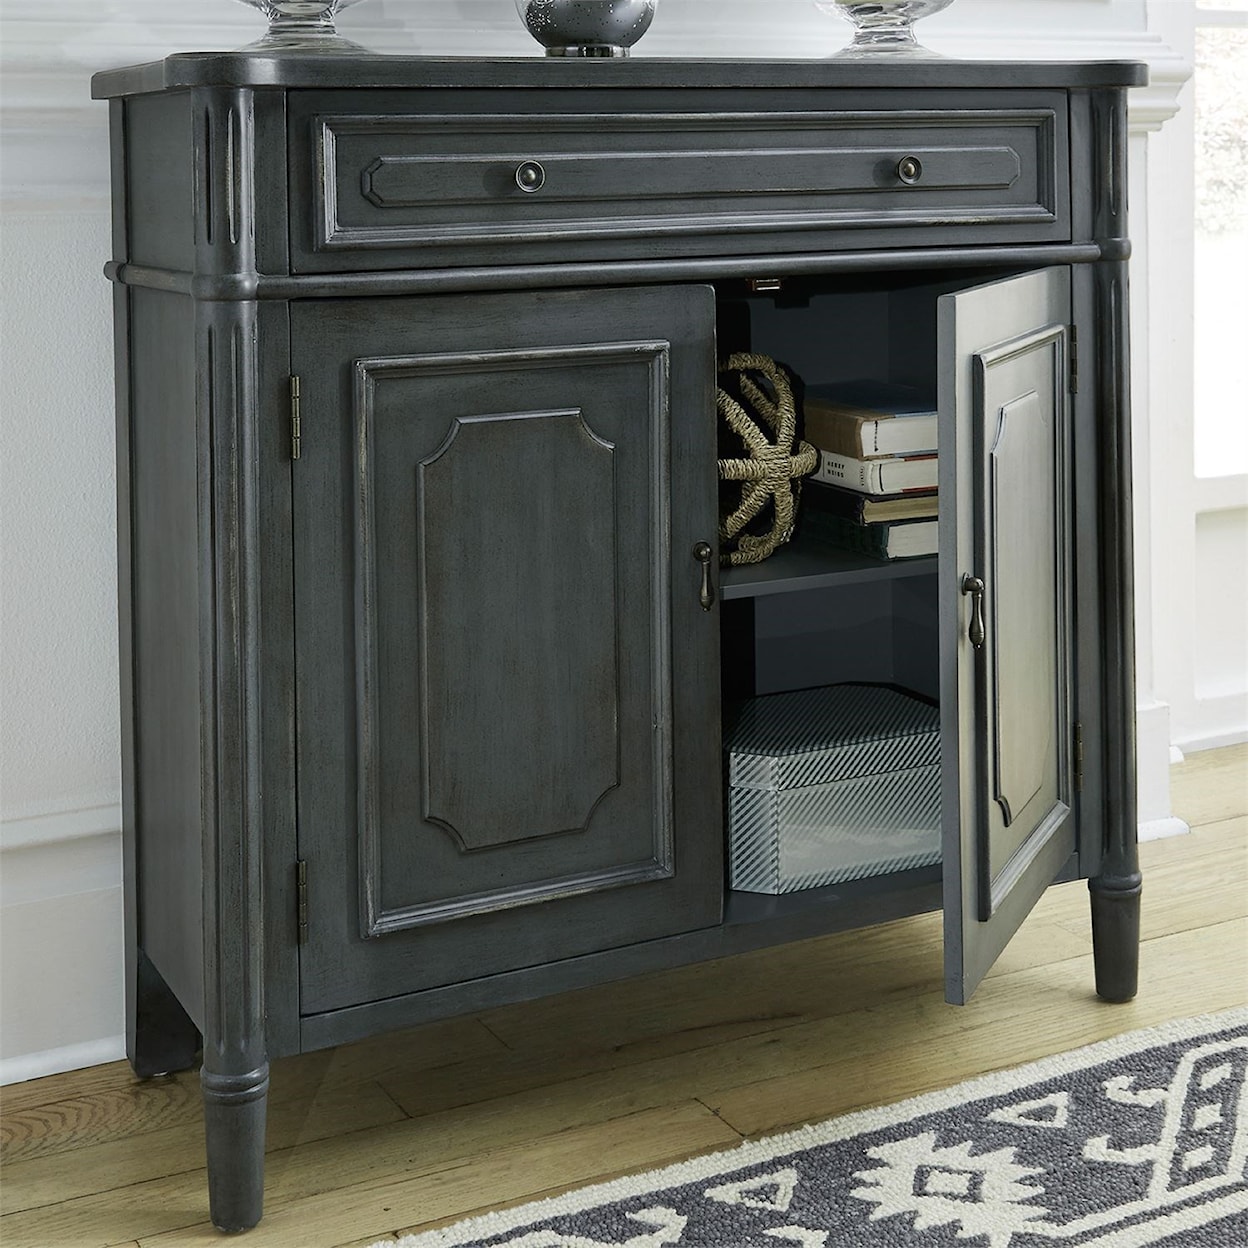 Liberty Furniture Madison Park 1-Drawer 2-Door Accent Cabinet